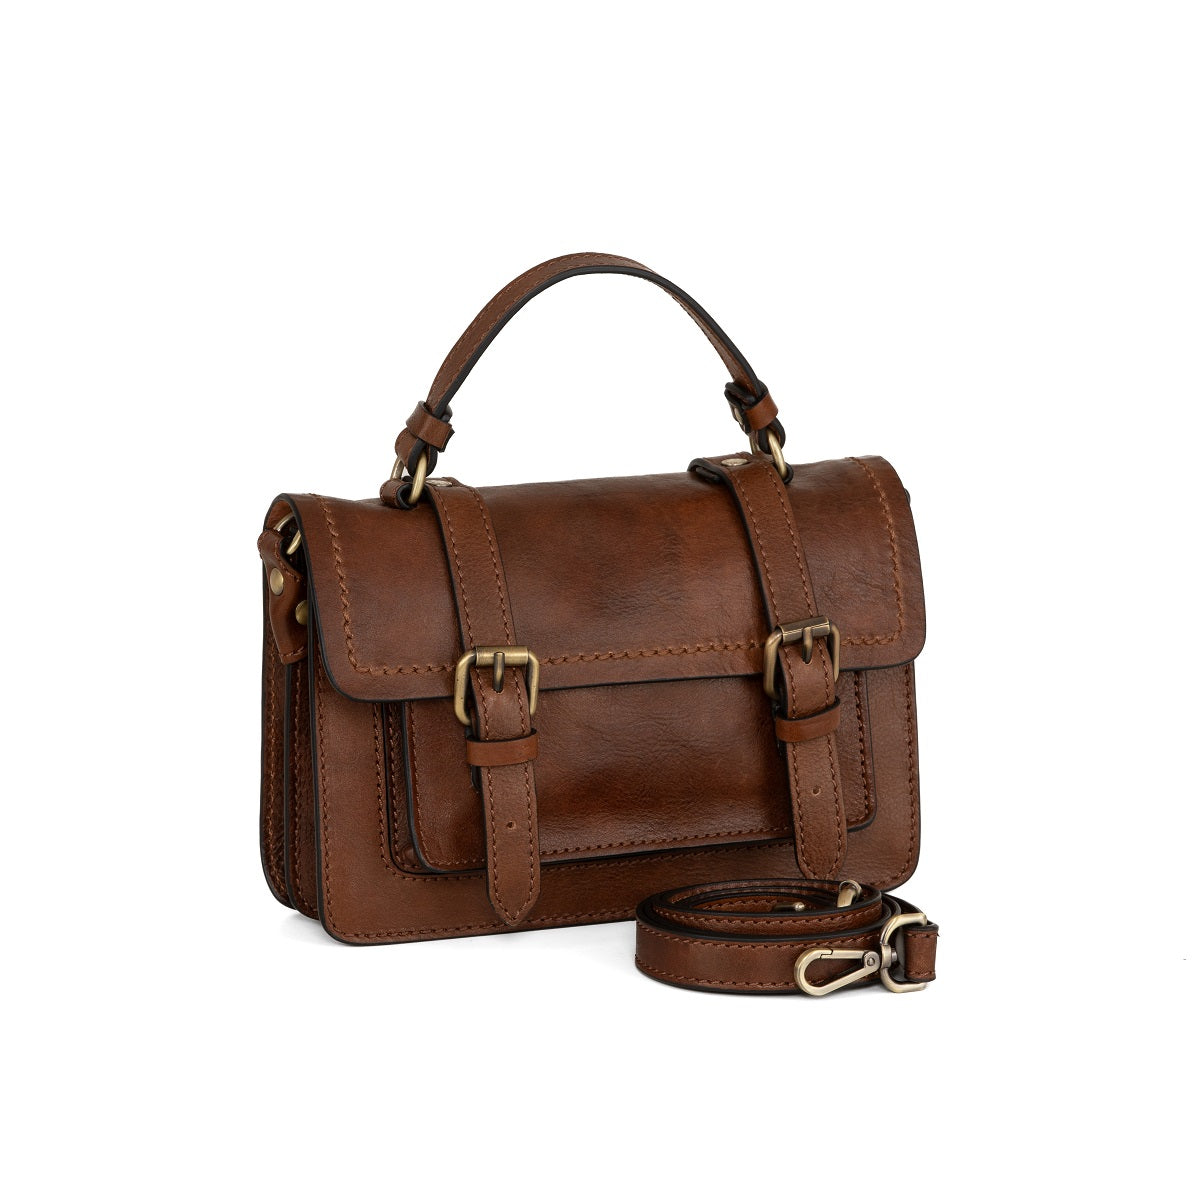 Jennifer by Gianni Conti - Italian Vegetable-Tanned Leather Top Handle Bag